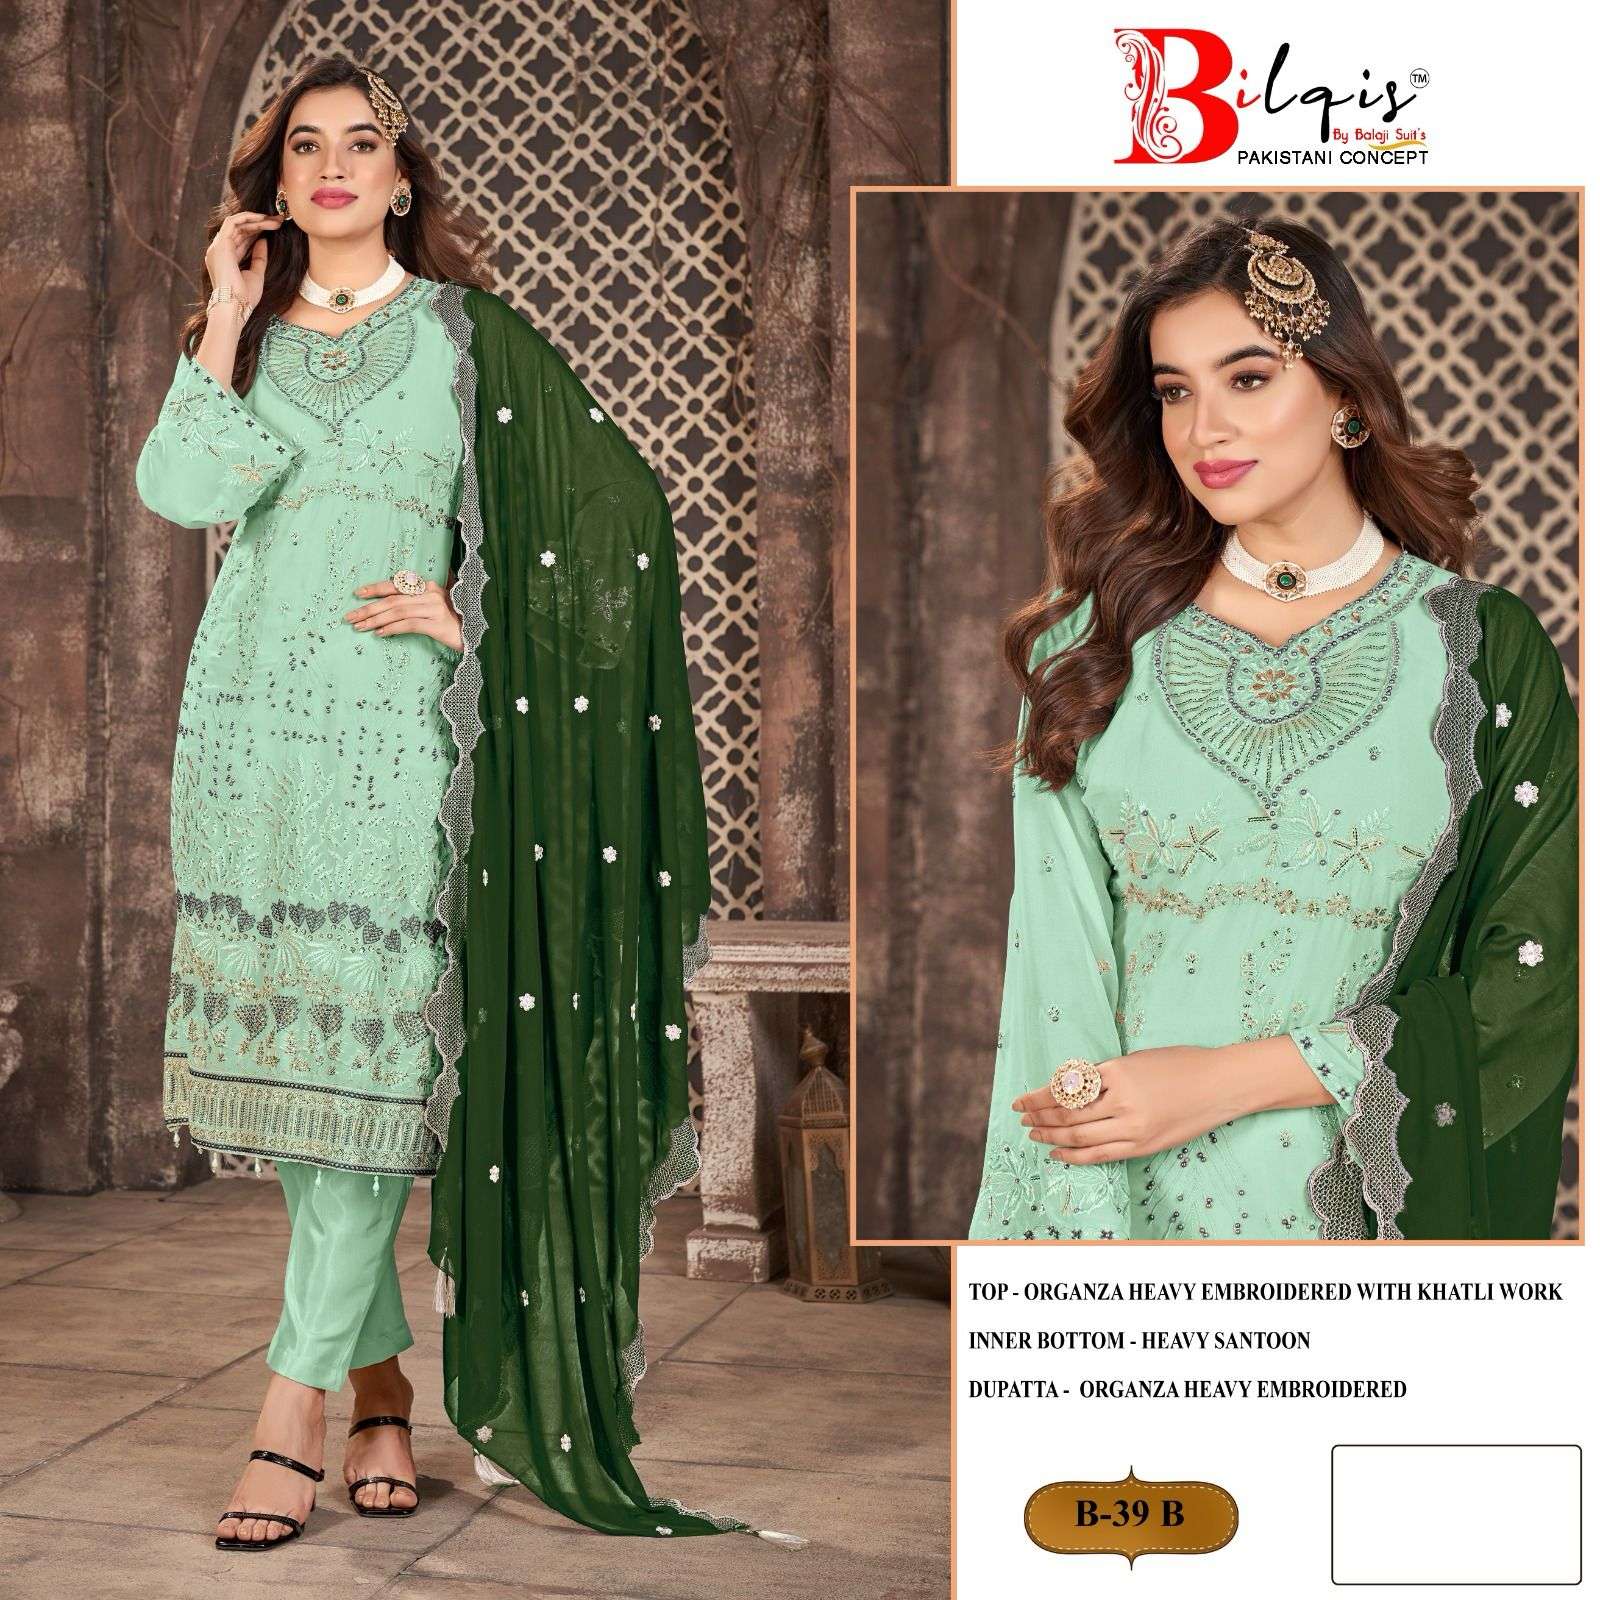 jalpa fashion Georgette Embroidered Salwar Suit Material Price in India -  Buy jalpa fashion Georgette Embroidered Salwar Suit Material online at  Flipkart.com